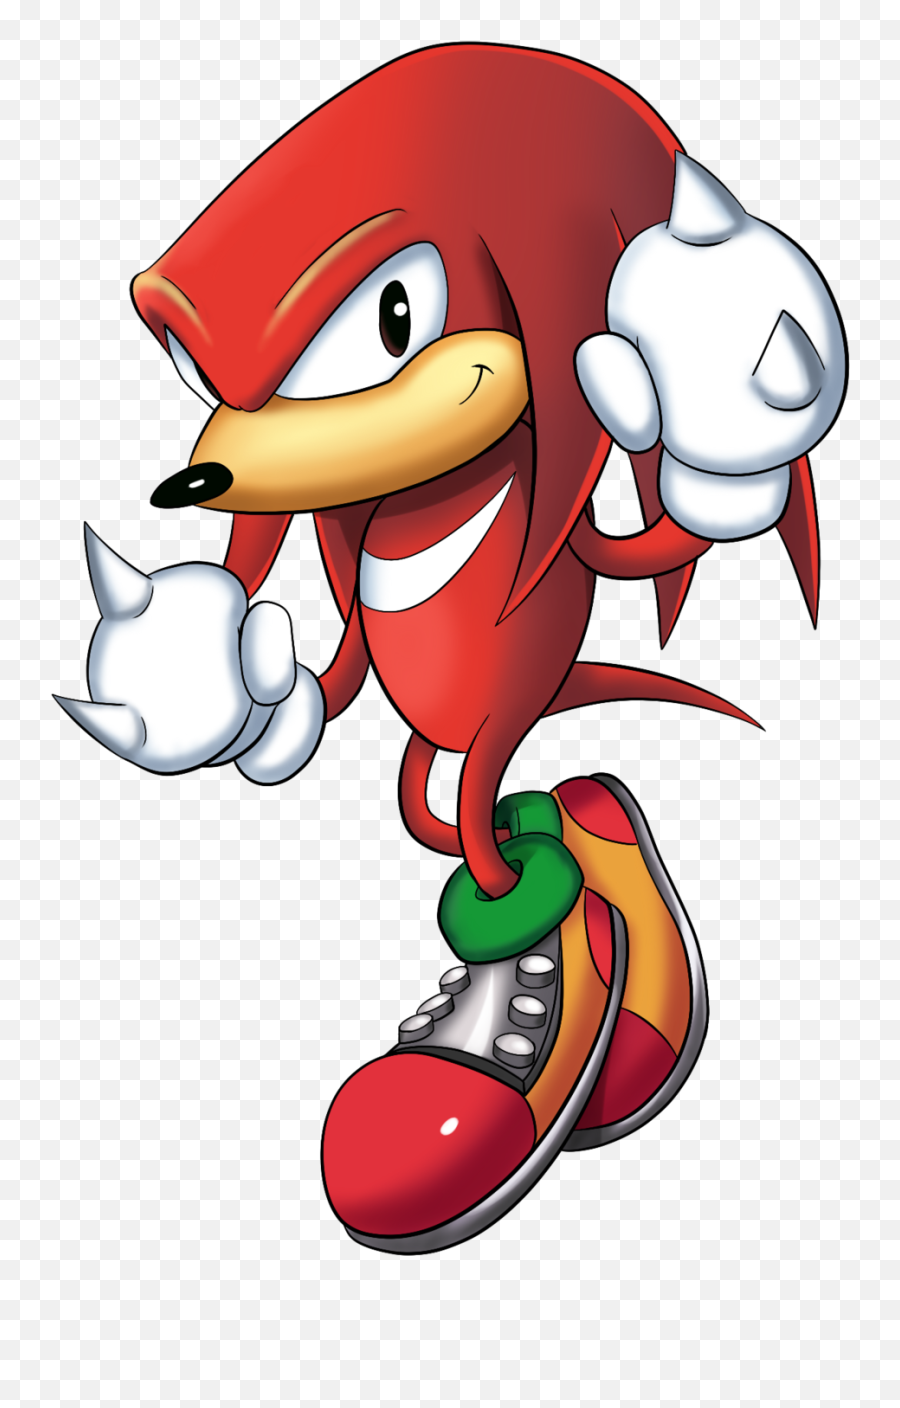 Download Sonic Mania Knuckles Png Image With No - Knuckles Mania And Knuckles Mod,Knuckles Png